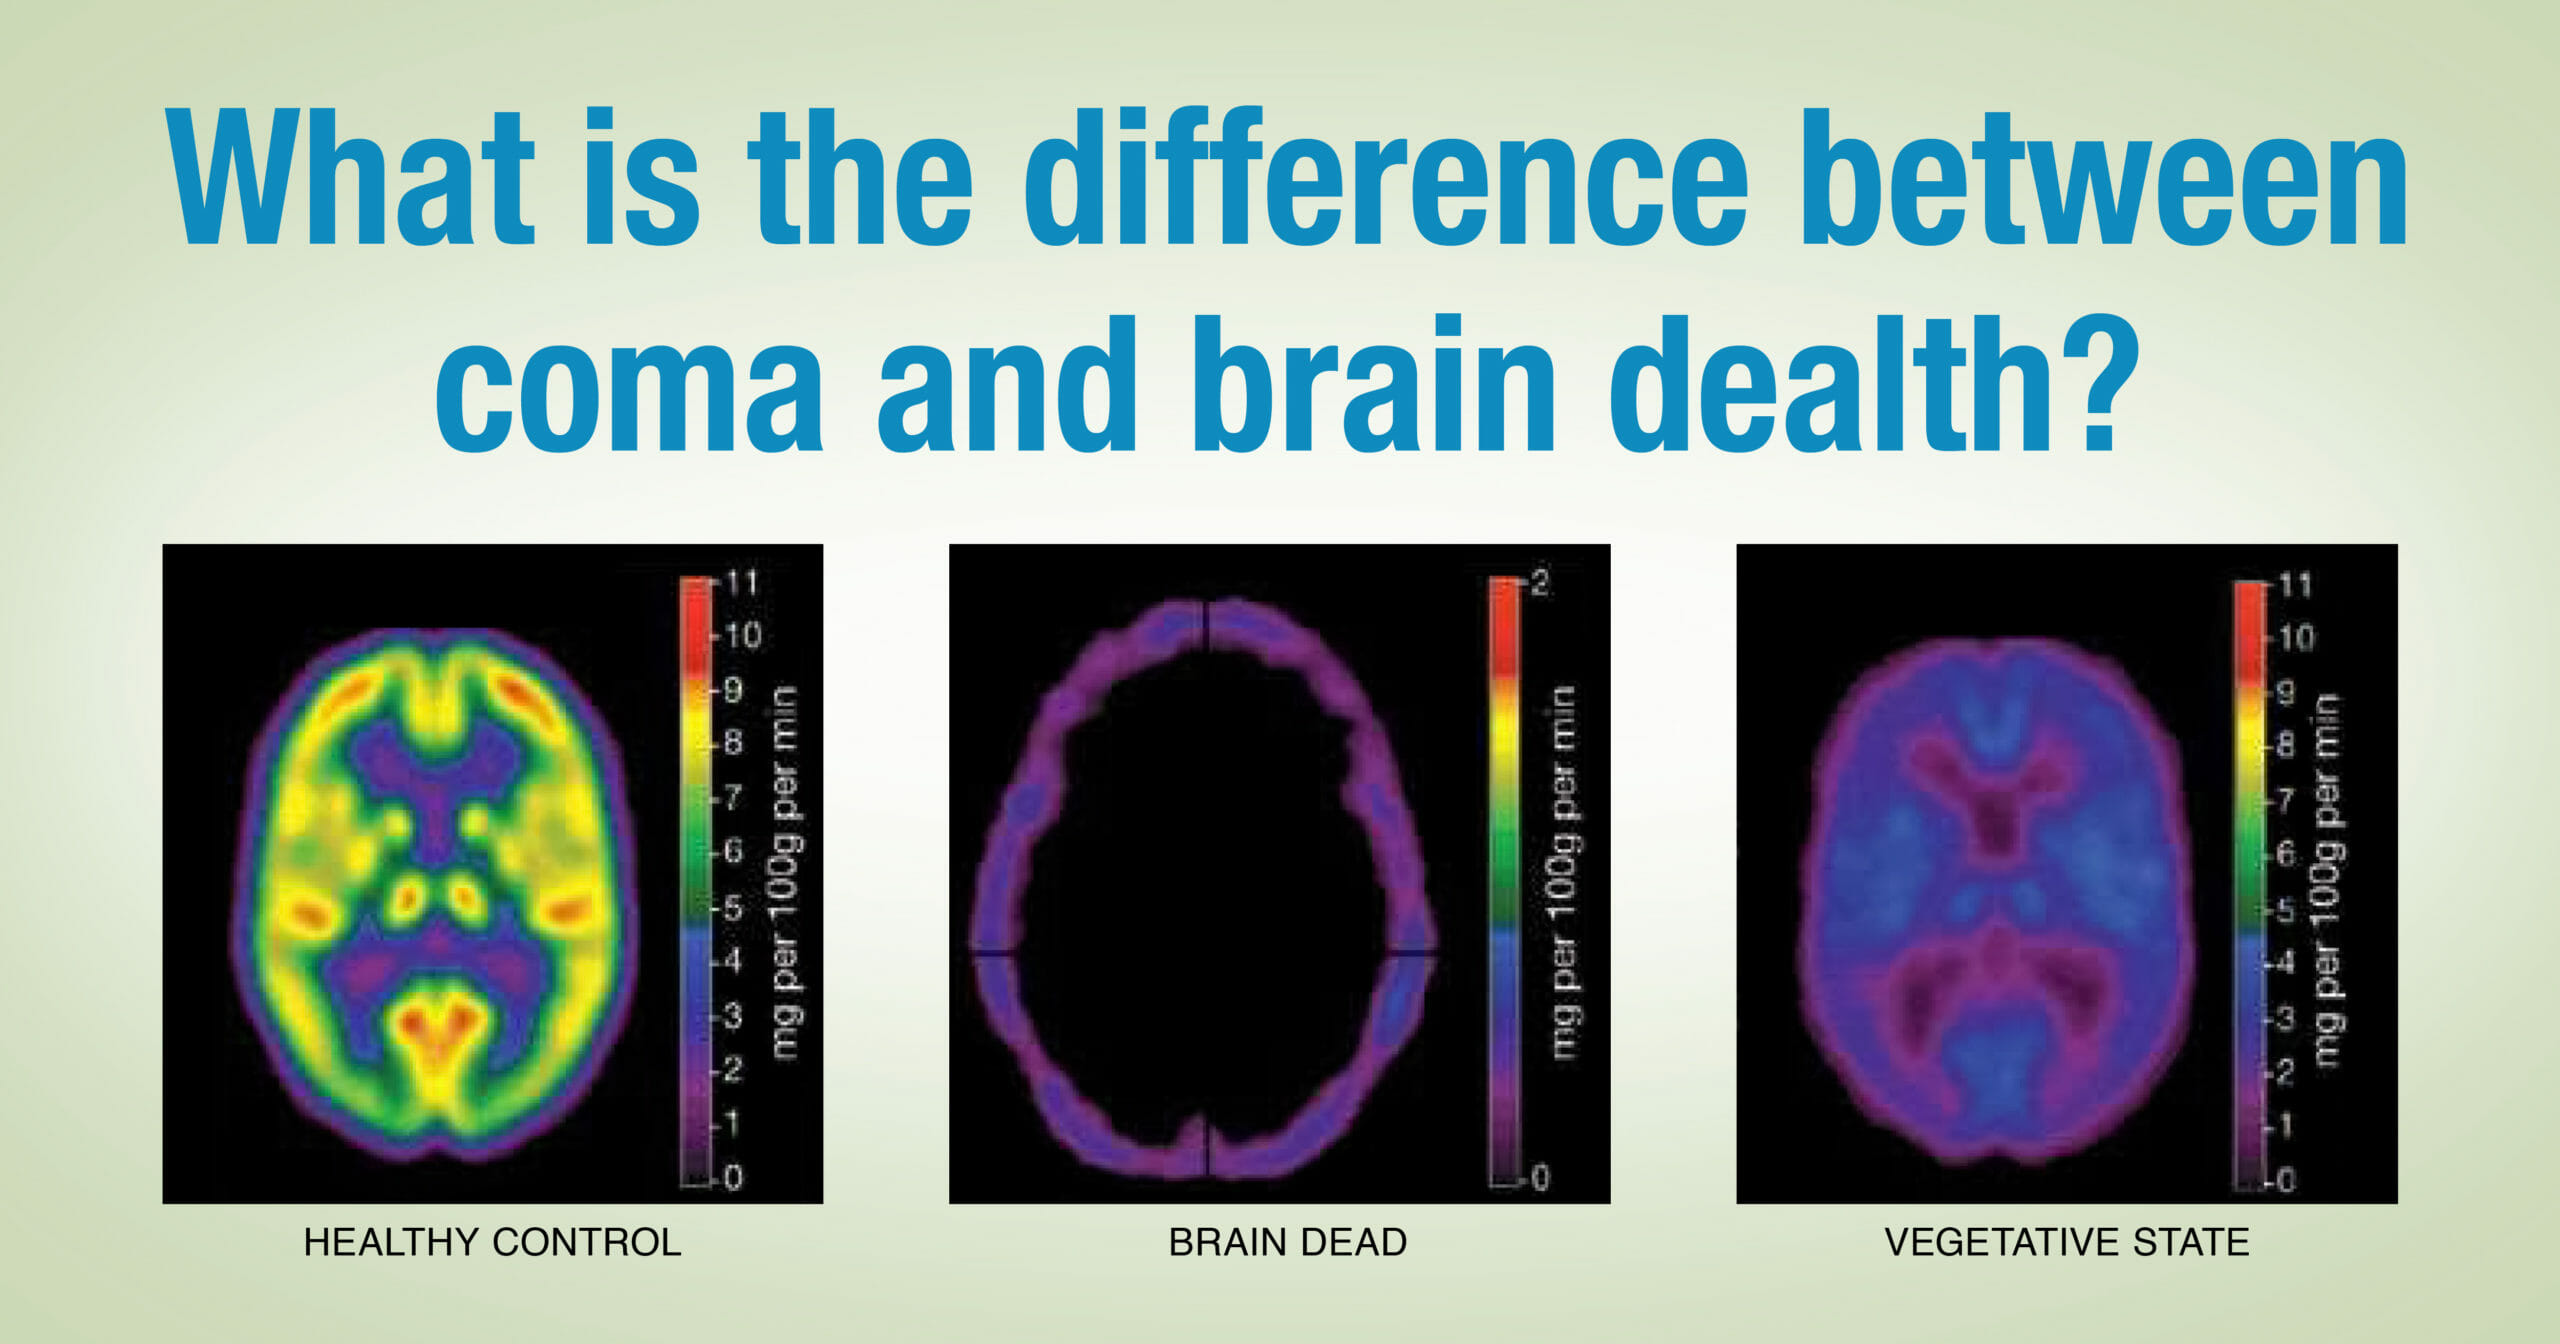 What Is The Difference Between A Coma And Brain Death Lifesource